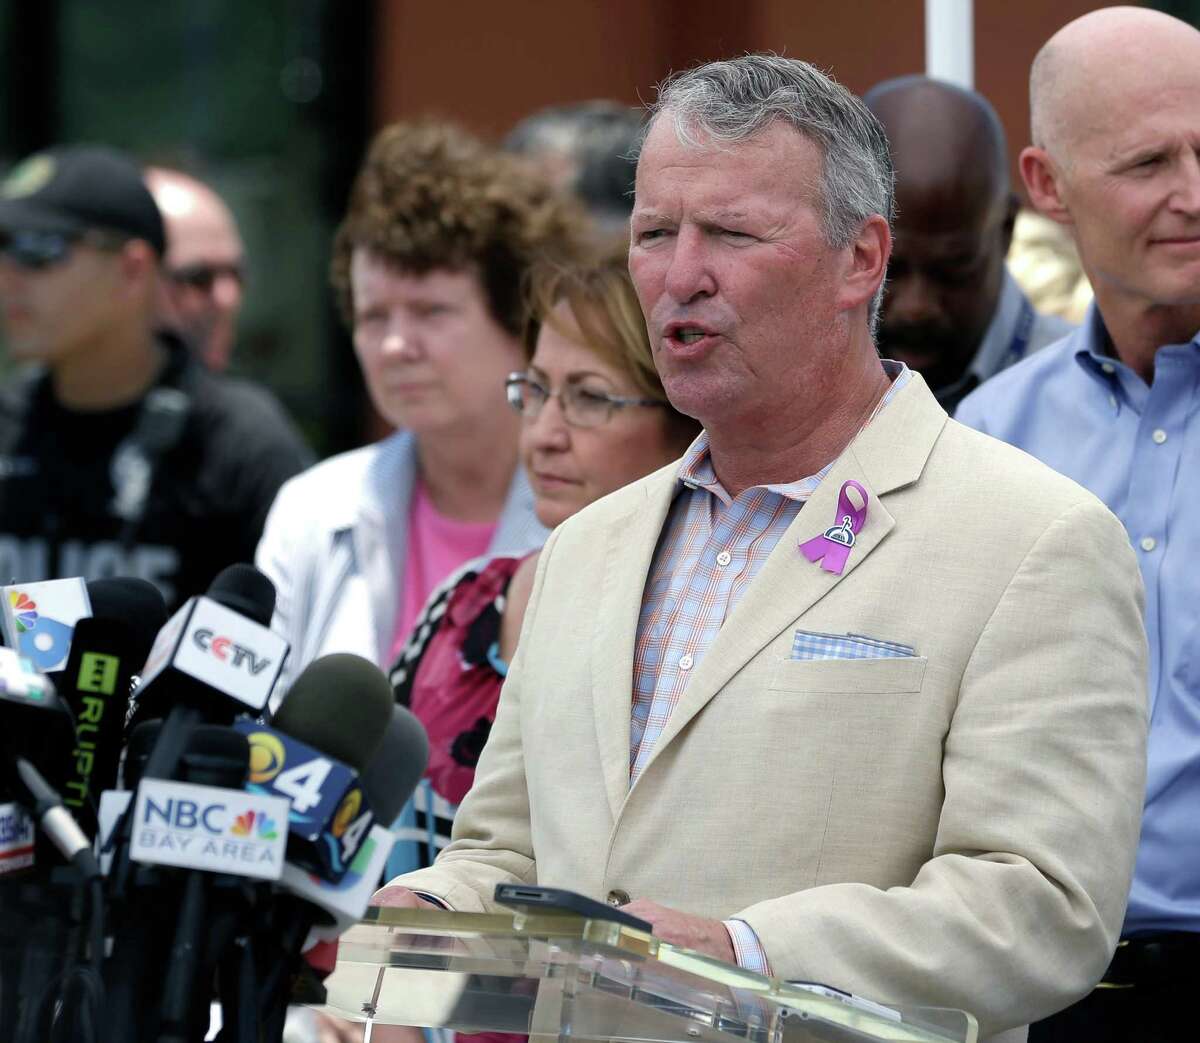 Orlando Mayor Buddy Dyer speaks during a news conference update about the recent mass shootings at the Pulse nightclub, Wednesday, June 15, 2016, in Orlando, Fla. (AP Photo/John Raoux) ORG XMIT: FLJR103